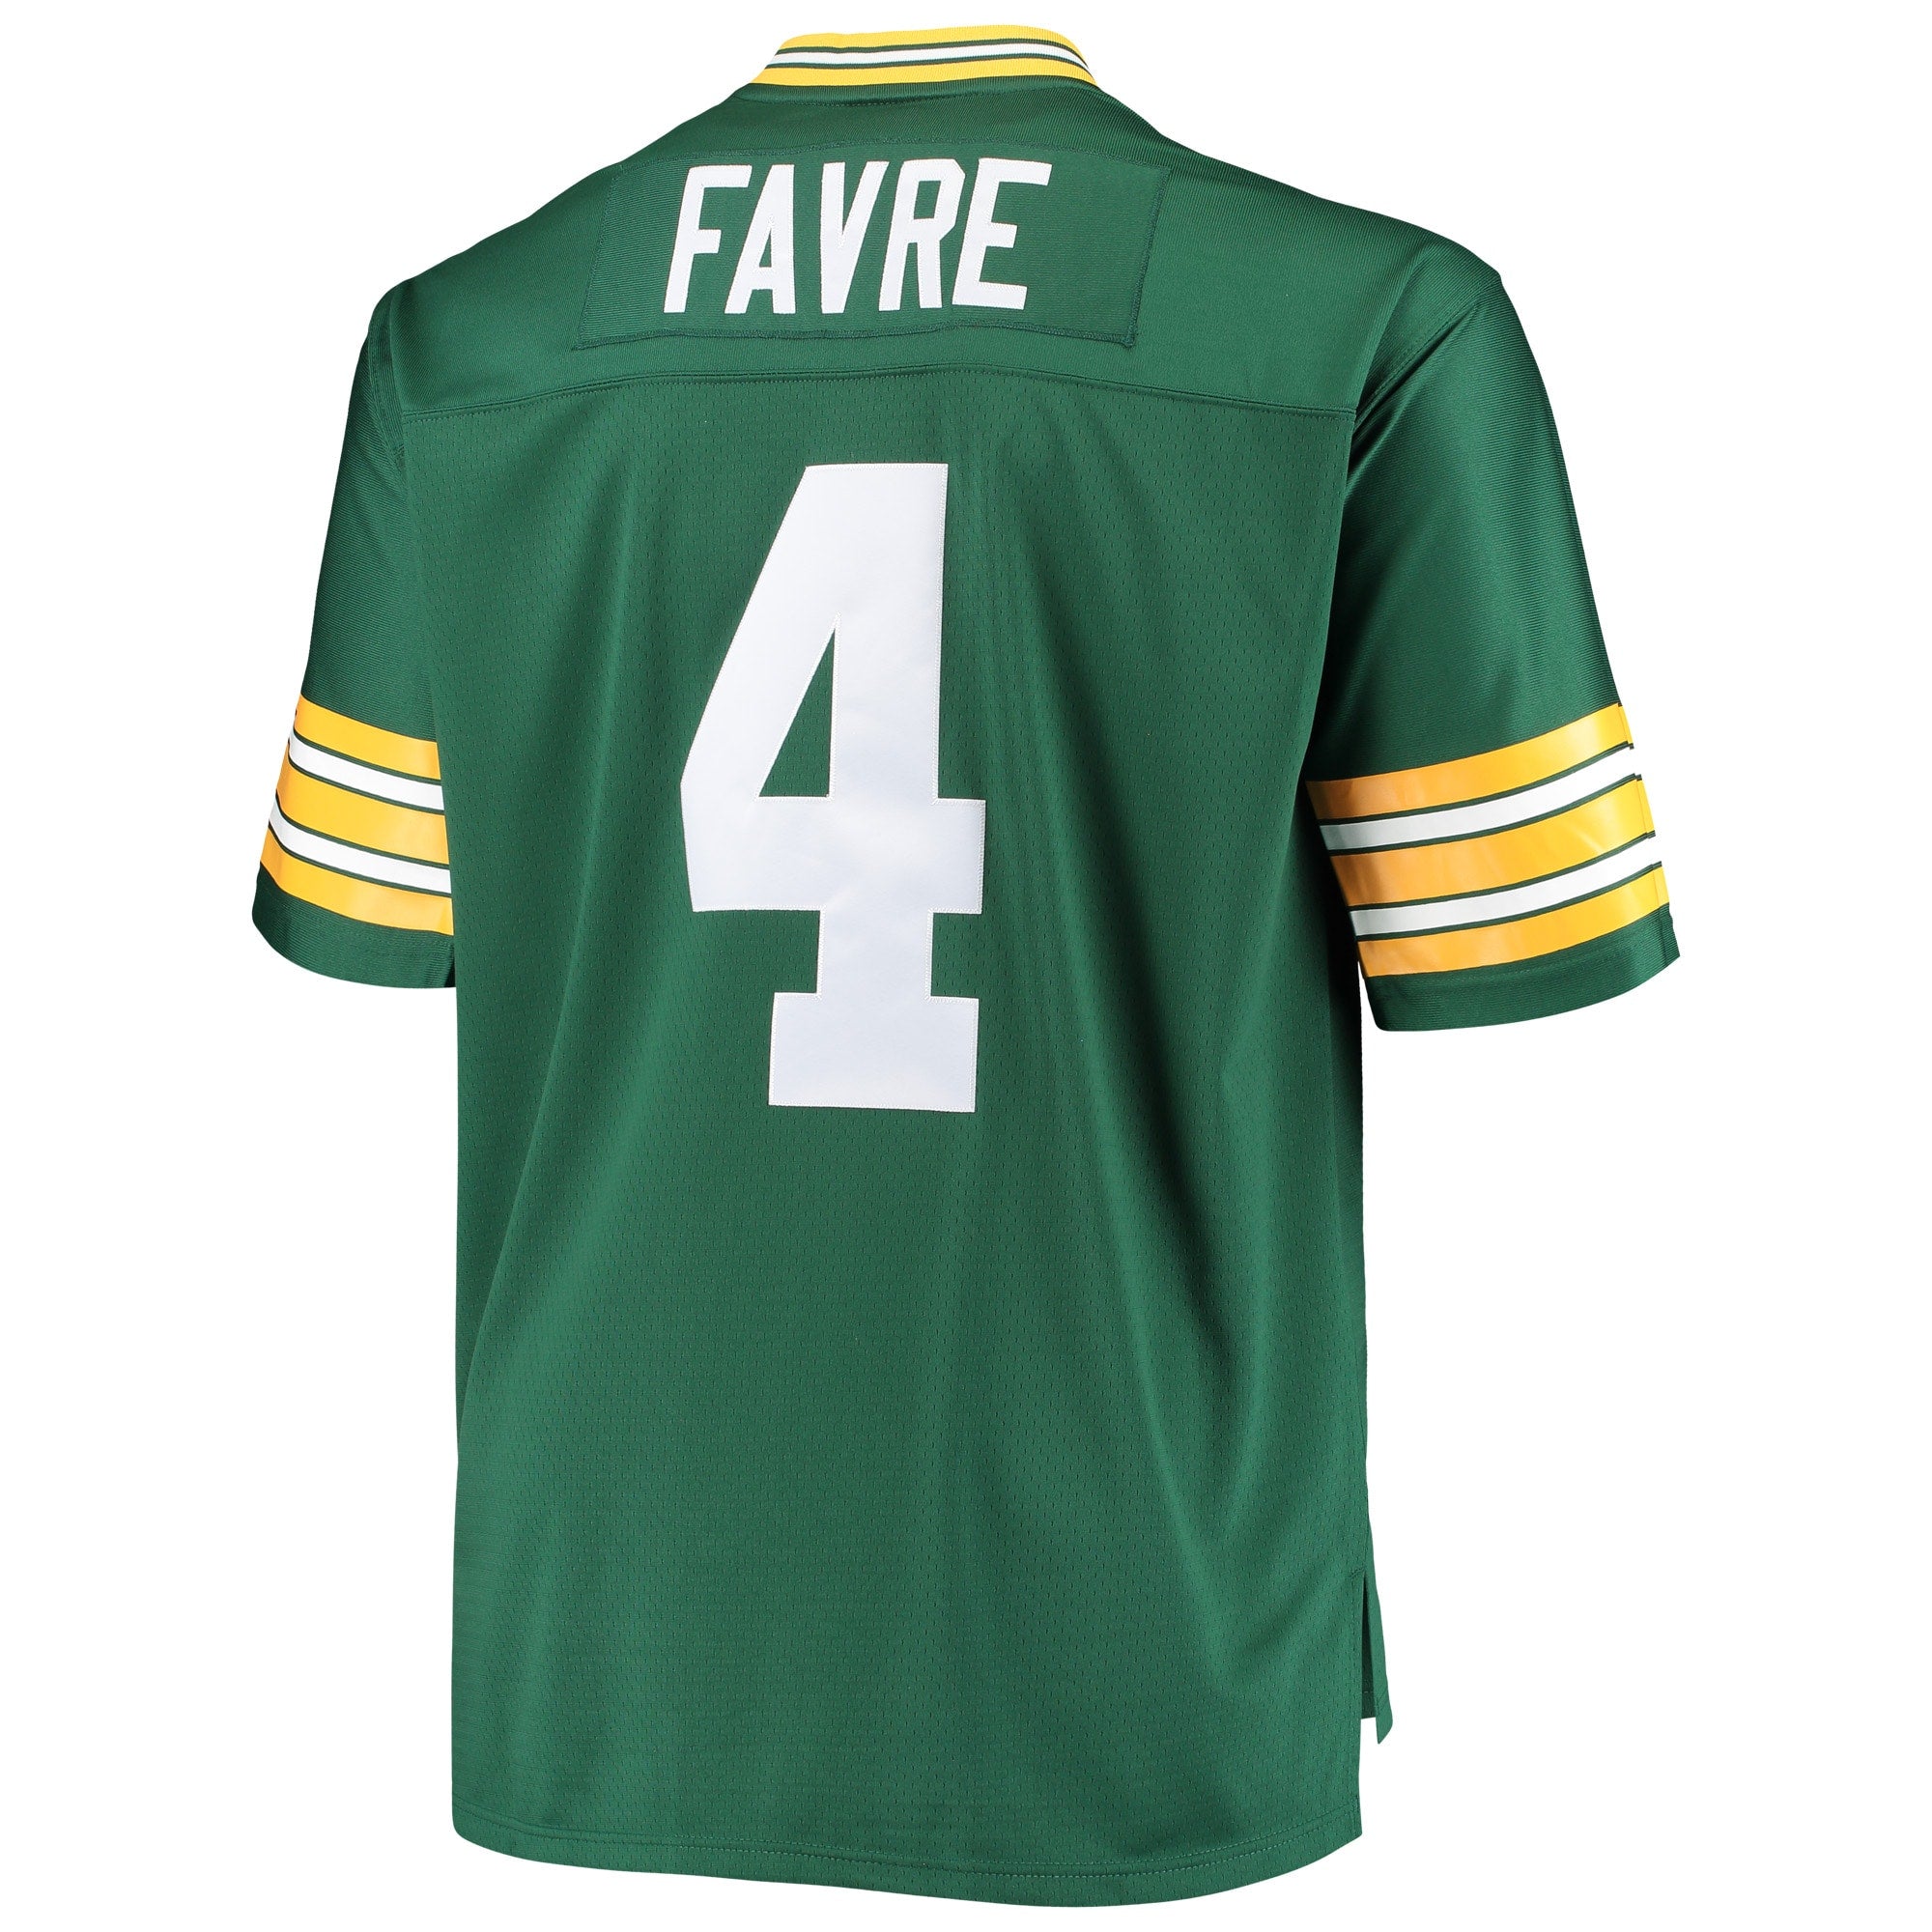 Mitchell and Ness Favre Packers Jersey Shirts (Green)-Nexus Clothing